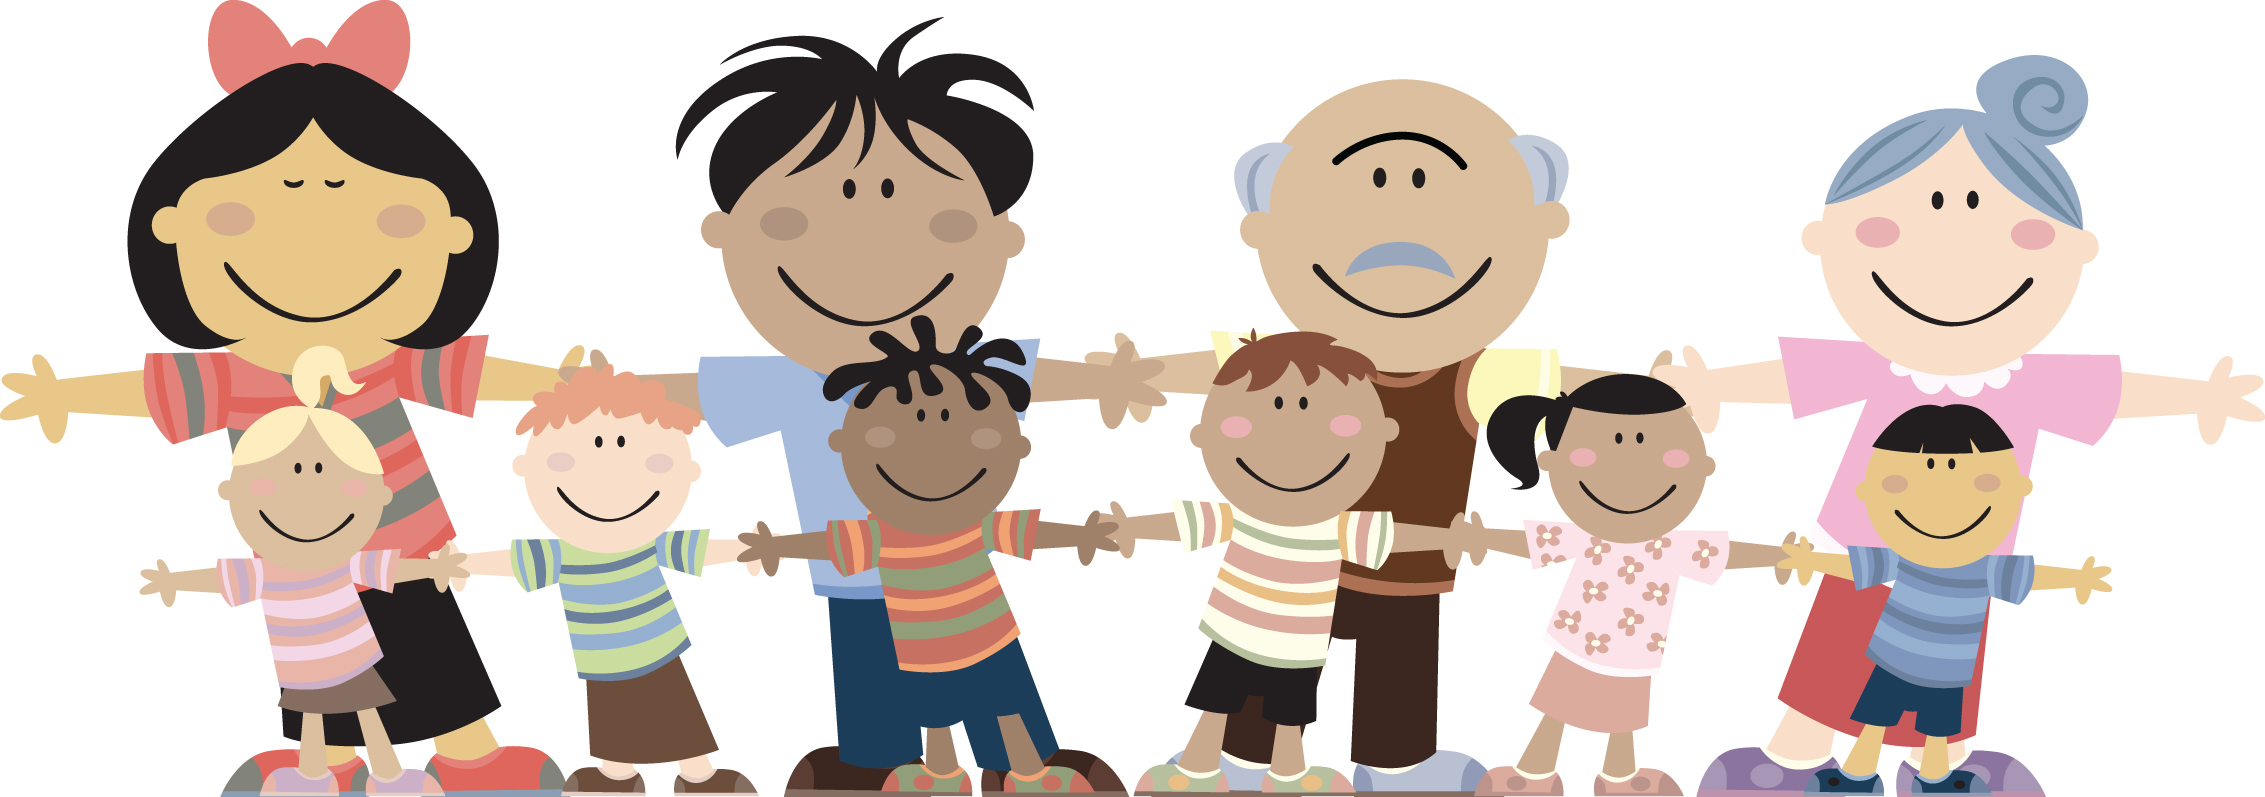 Family Cartoon Pictures - ClipArt Best